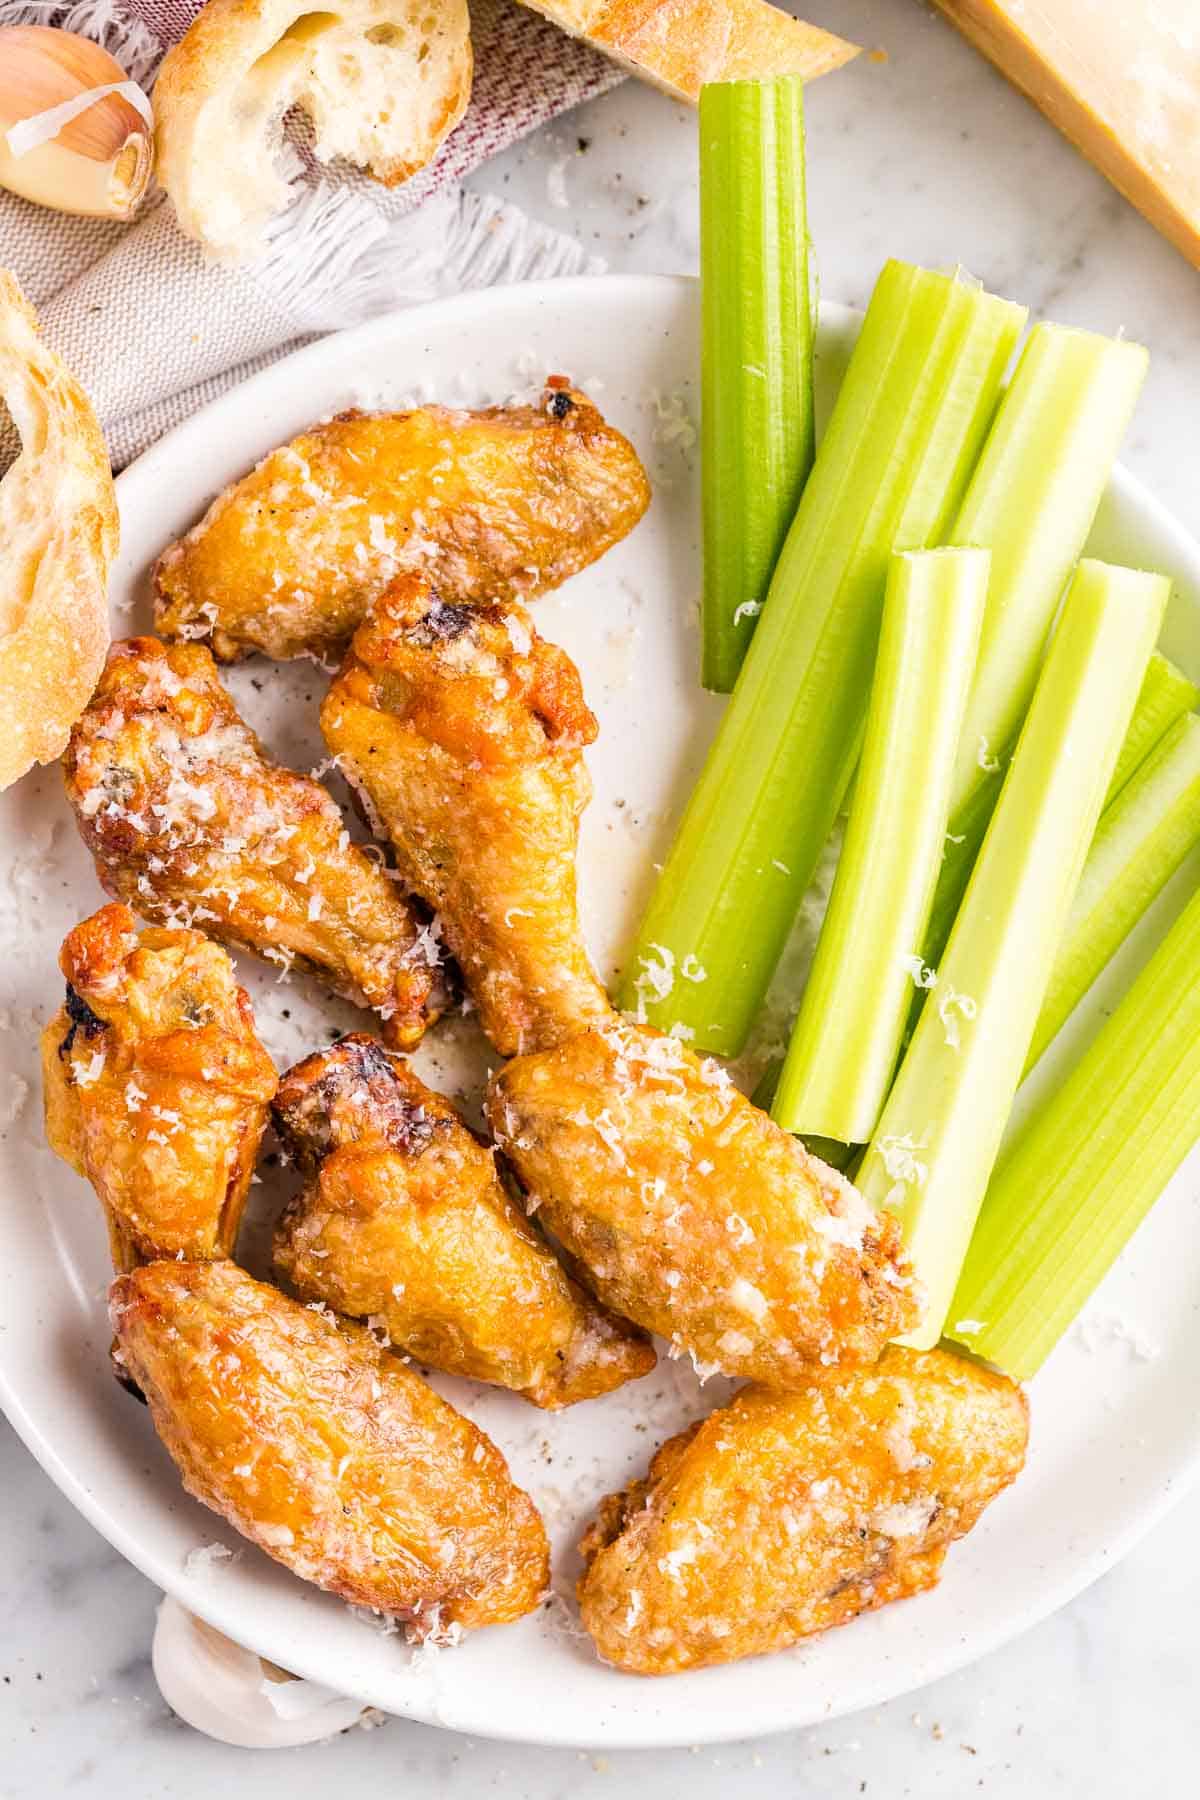 Chicken wings on a serving platter.